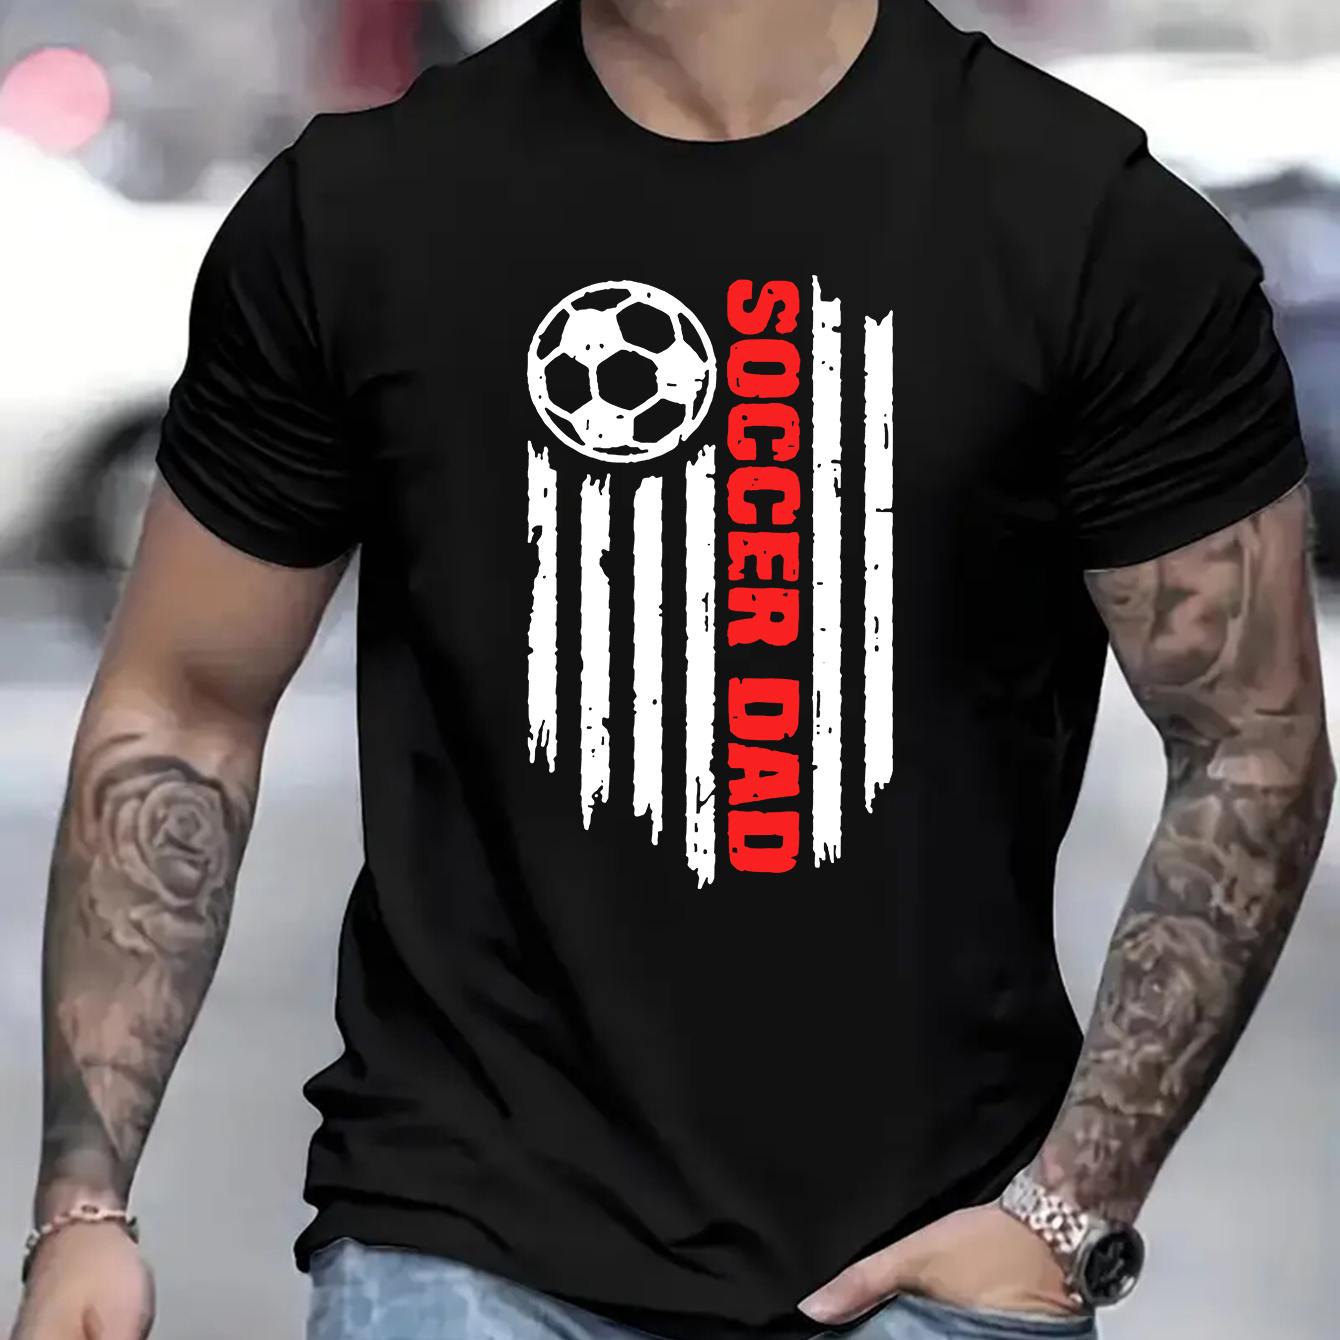 

Soccer Dad" Creative Print Casual Novelty T-shirt For Men, Short Sleeve Summer& Spring Top, Comfort Fit, Stylish Streetwear Crew Neck Tee For Daily Wear